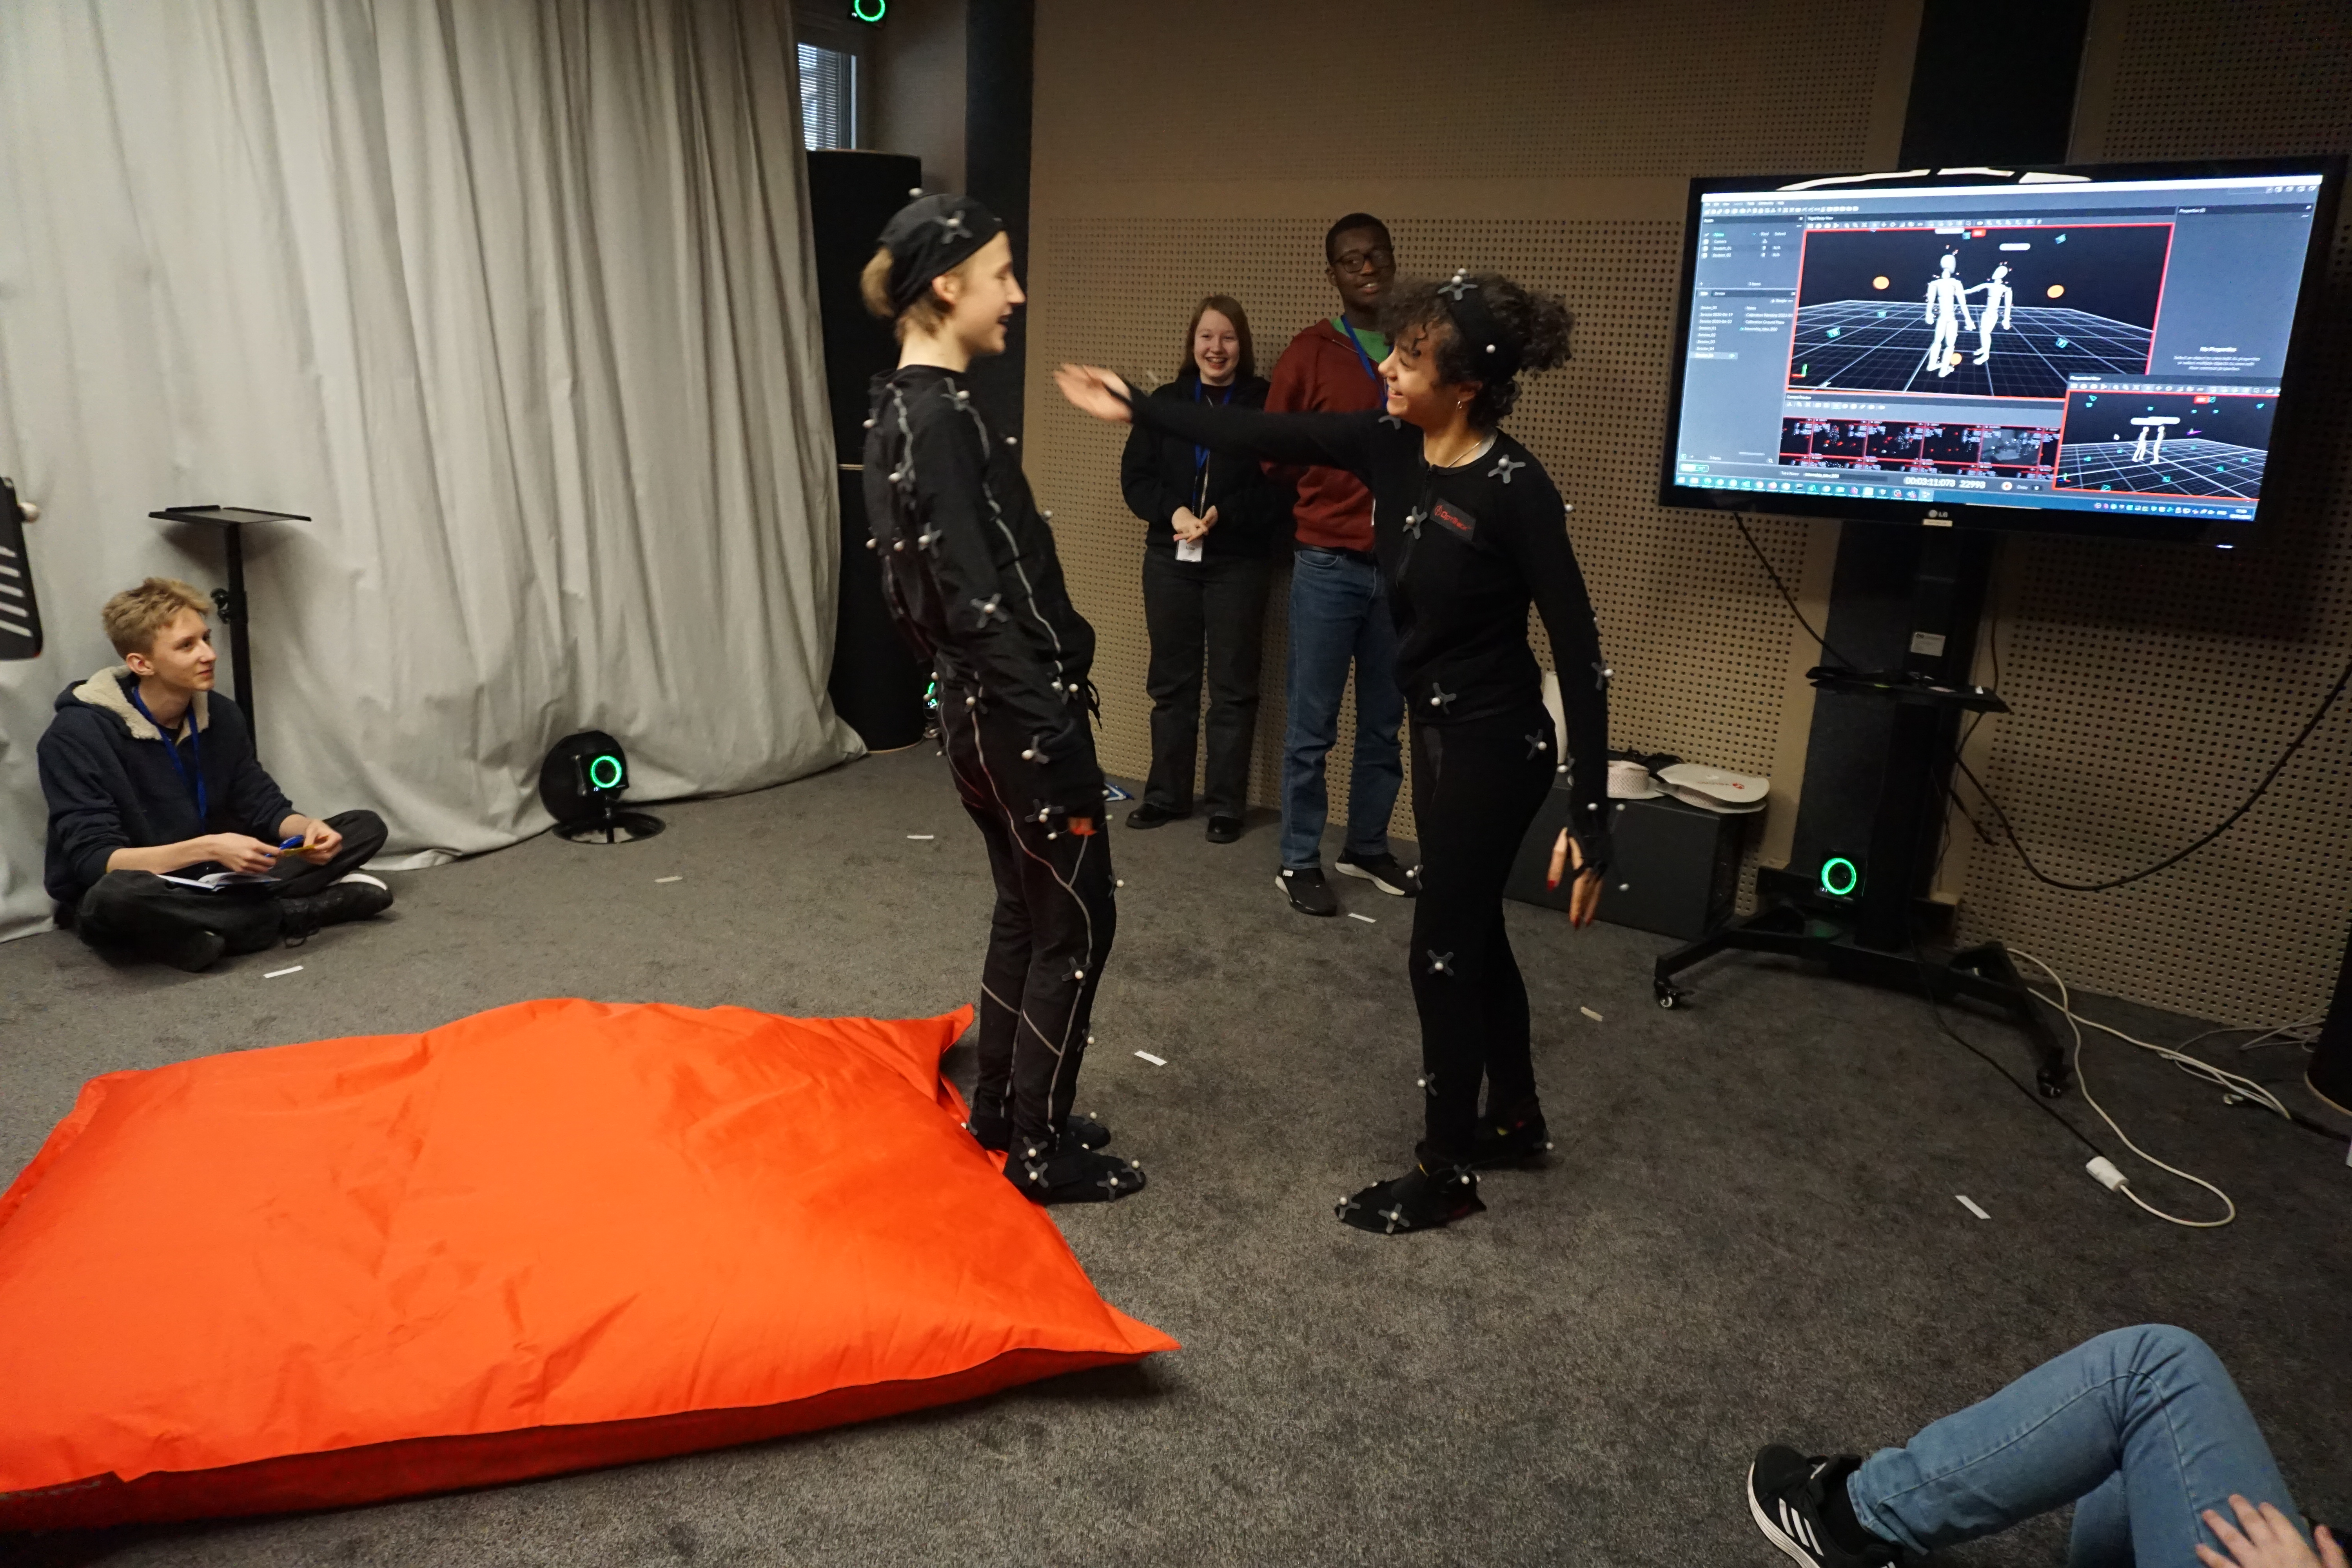 Motion Capturing in Action. Credit: Initiative Creative Gaming